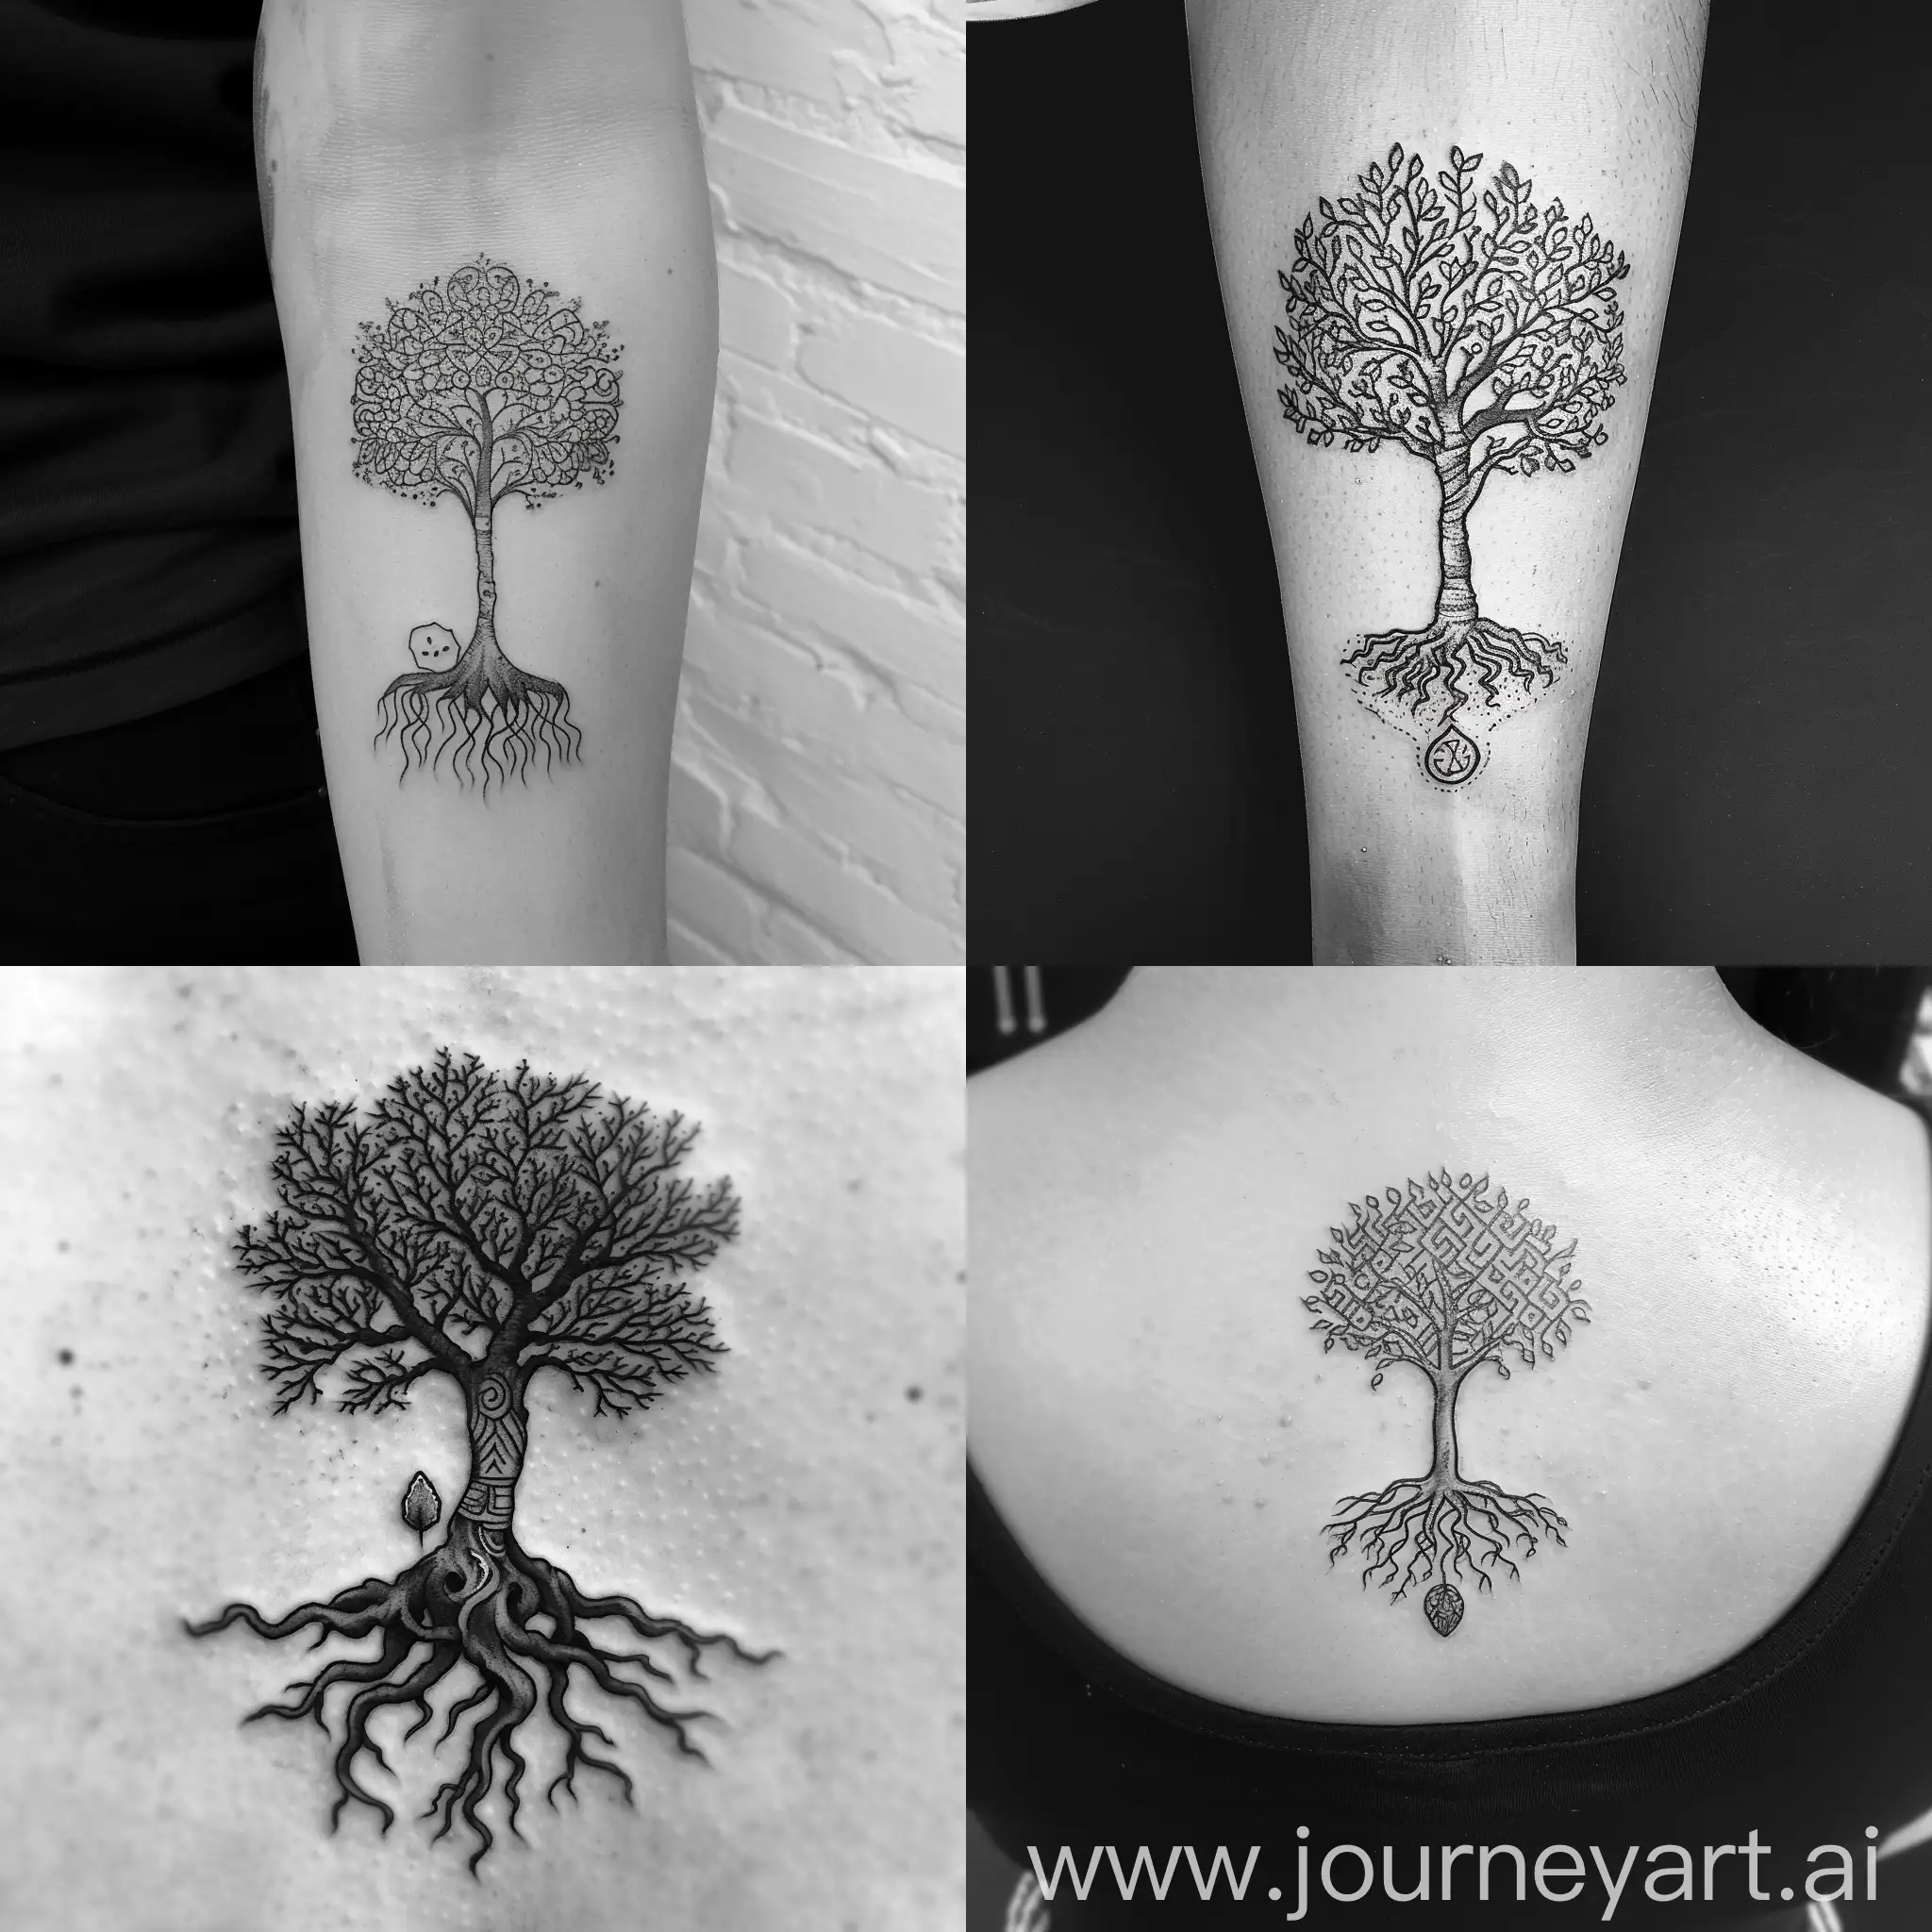 Let's delve deeper into a more philosophical symbol:

Picture a solitary tree, its roots delving deep into the earth while its branches reach towards the sky. The tree represents resilience, growth, and the interconnectedness of all life.

At the base of the tree, a small seed lies nestled in the soil, symbolizing the potential for transformation and renewal. From this tiny seed, the mighty tree emerges, embodying the journey from adversity to liberation.

Carved into the trunk of the tree are intricate patterns, reminiscent of ancient symbols of wisdom and enlightenment. These patterns speak to the complexities of human experience and the quest for understanding and freedom.

As you contemplate this minimalist tattoo, envision yourself as the tree, grounded in your values and beliefs, yet reaching ever upwards towards the limitless expanse of the sky. Your roots anchor you to the earth, providing strength and stability, while your branches stretch towards the heavens, embracing the boundless possibilities of existence.

This tattoo serves as a reminder of your capacity for growth and transformation, as well as your inherent connection to the natural world and the universal quest for freedom and self-realization.